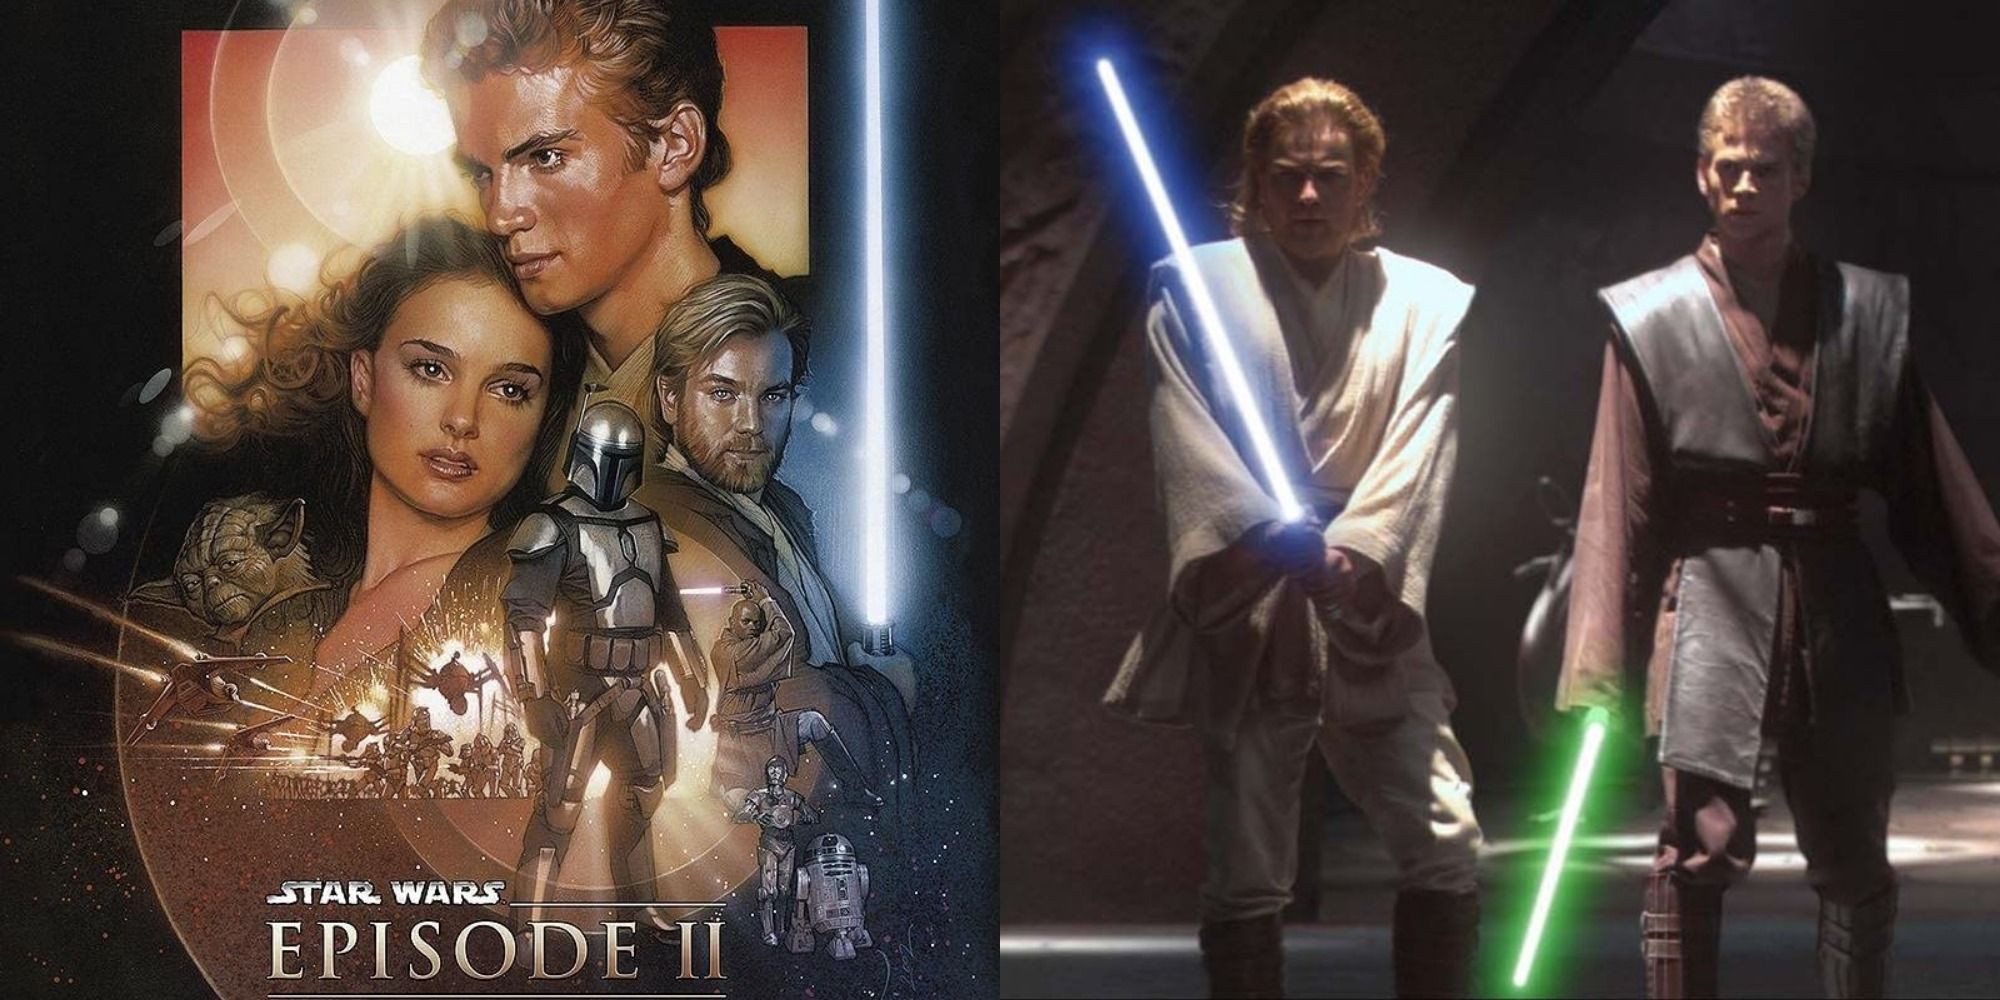 Star Wars Attack of the Clones poster; Anakin and Obi-Wan with lightsabers